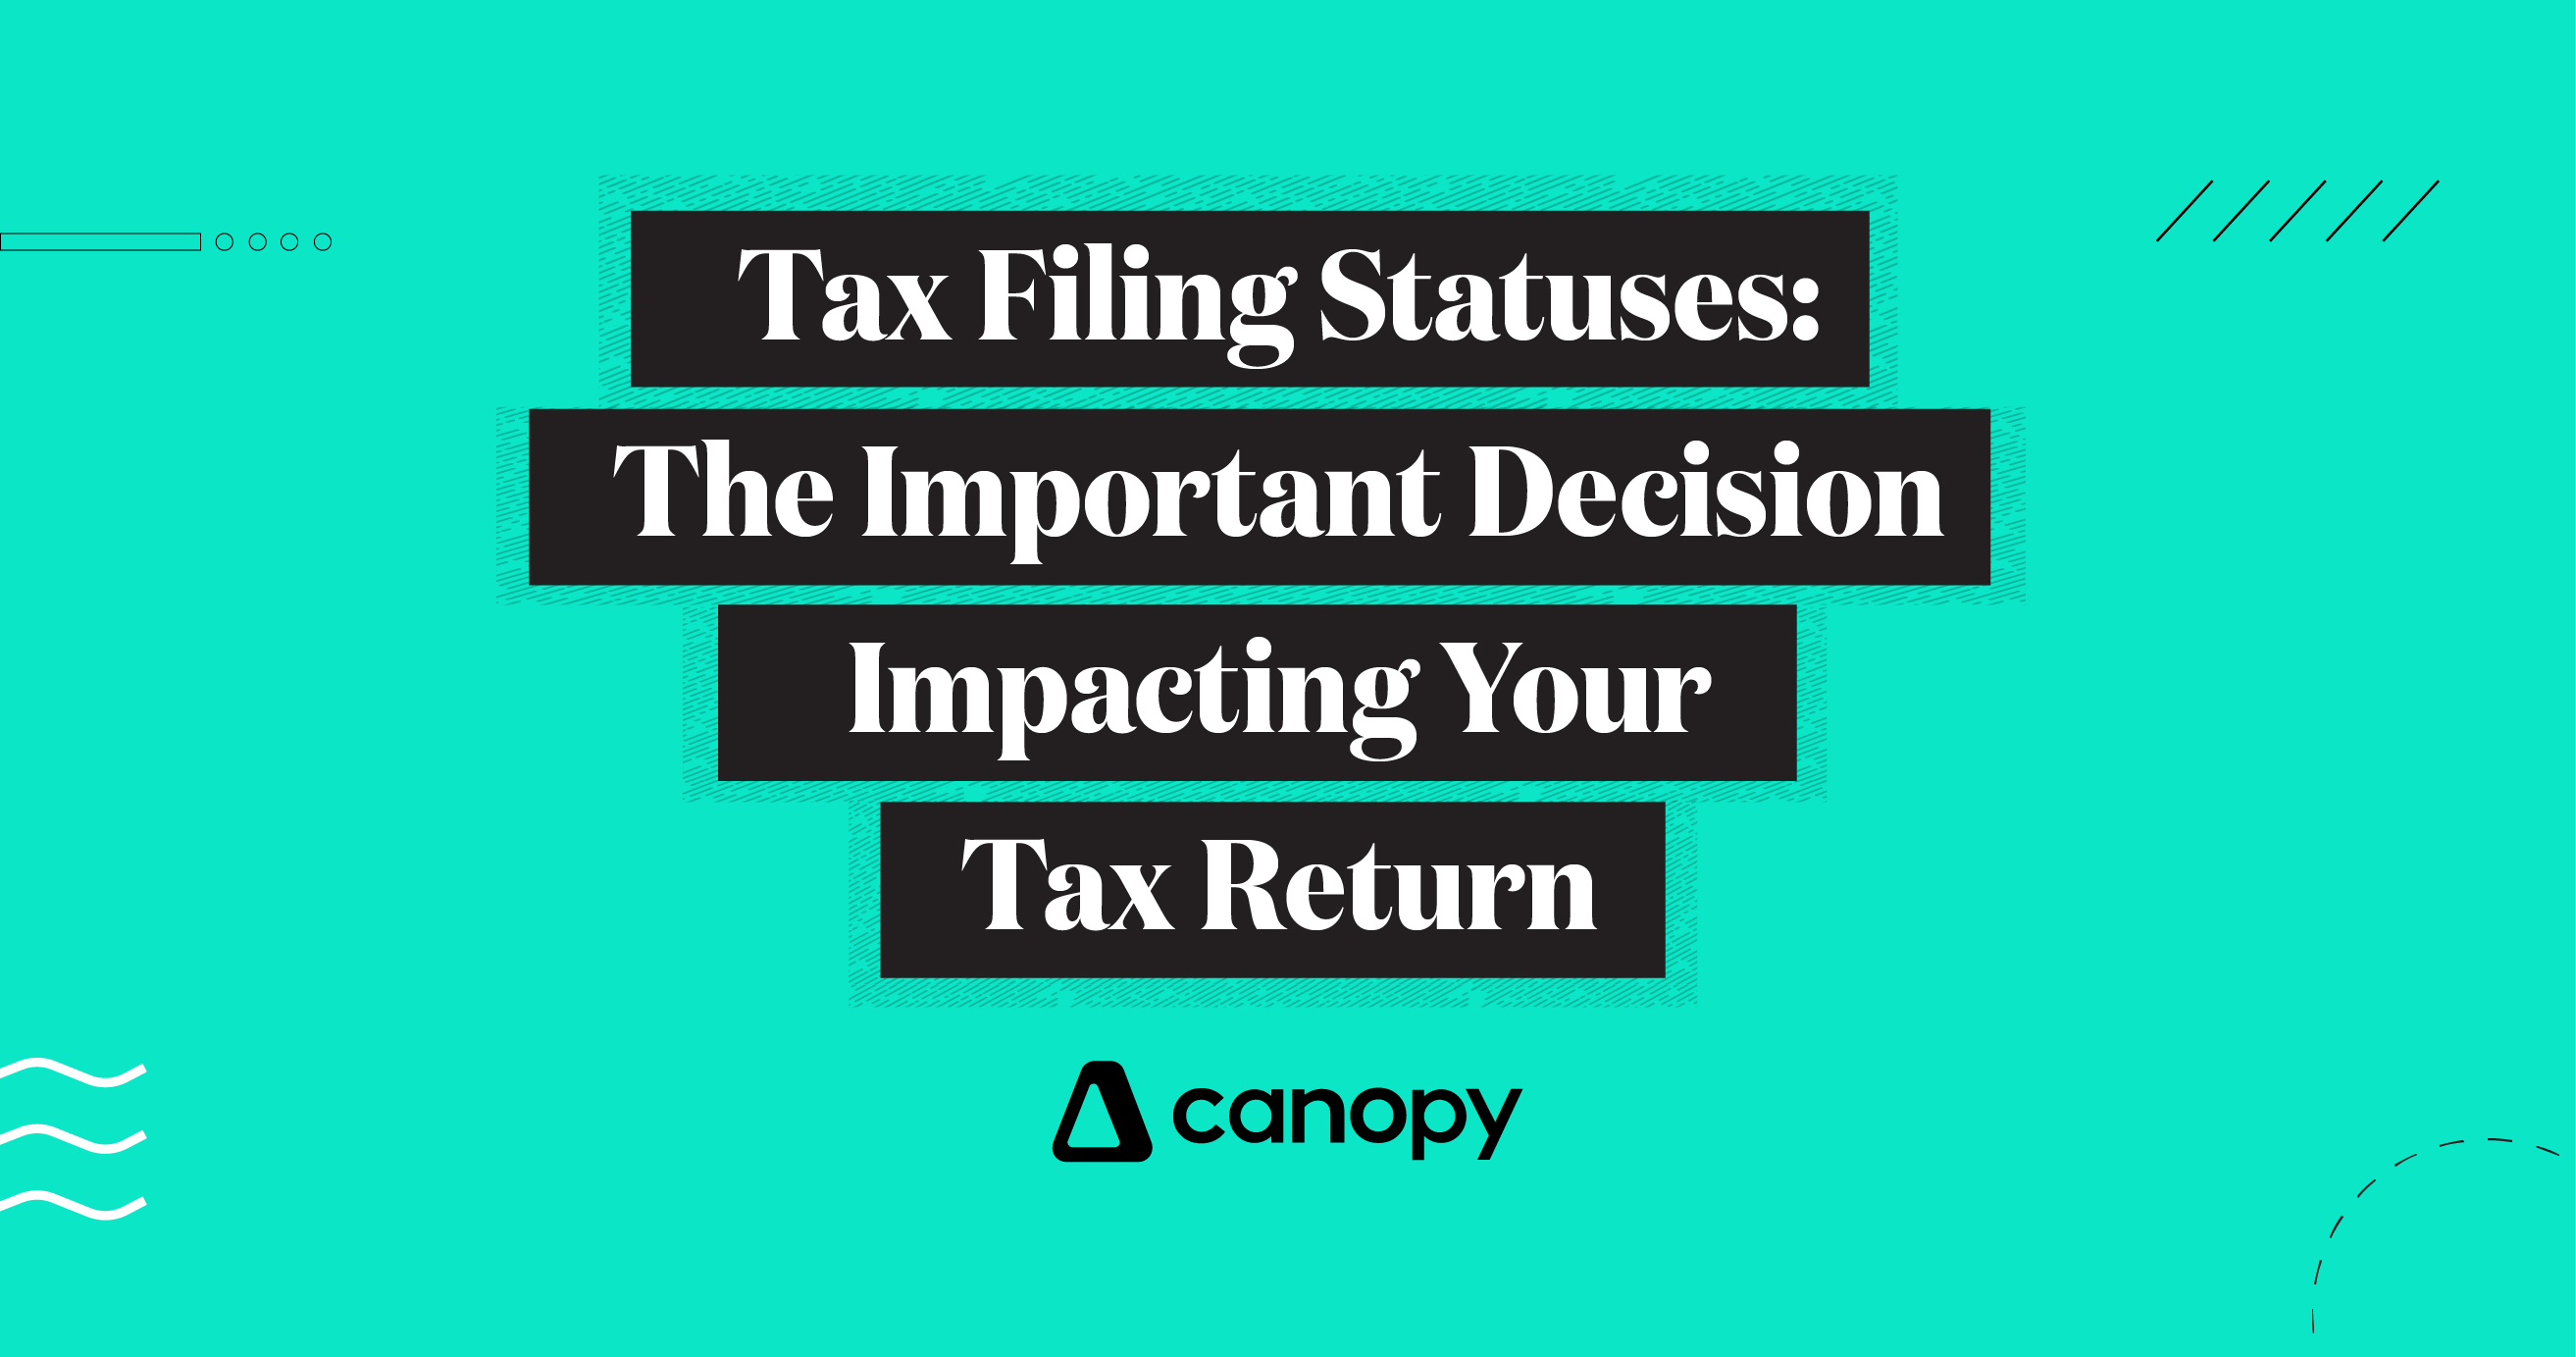 Tax Filing Statuses: The Important Decision Impacting Your Tax Return